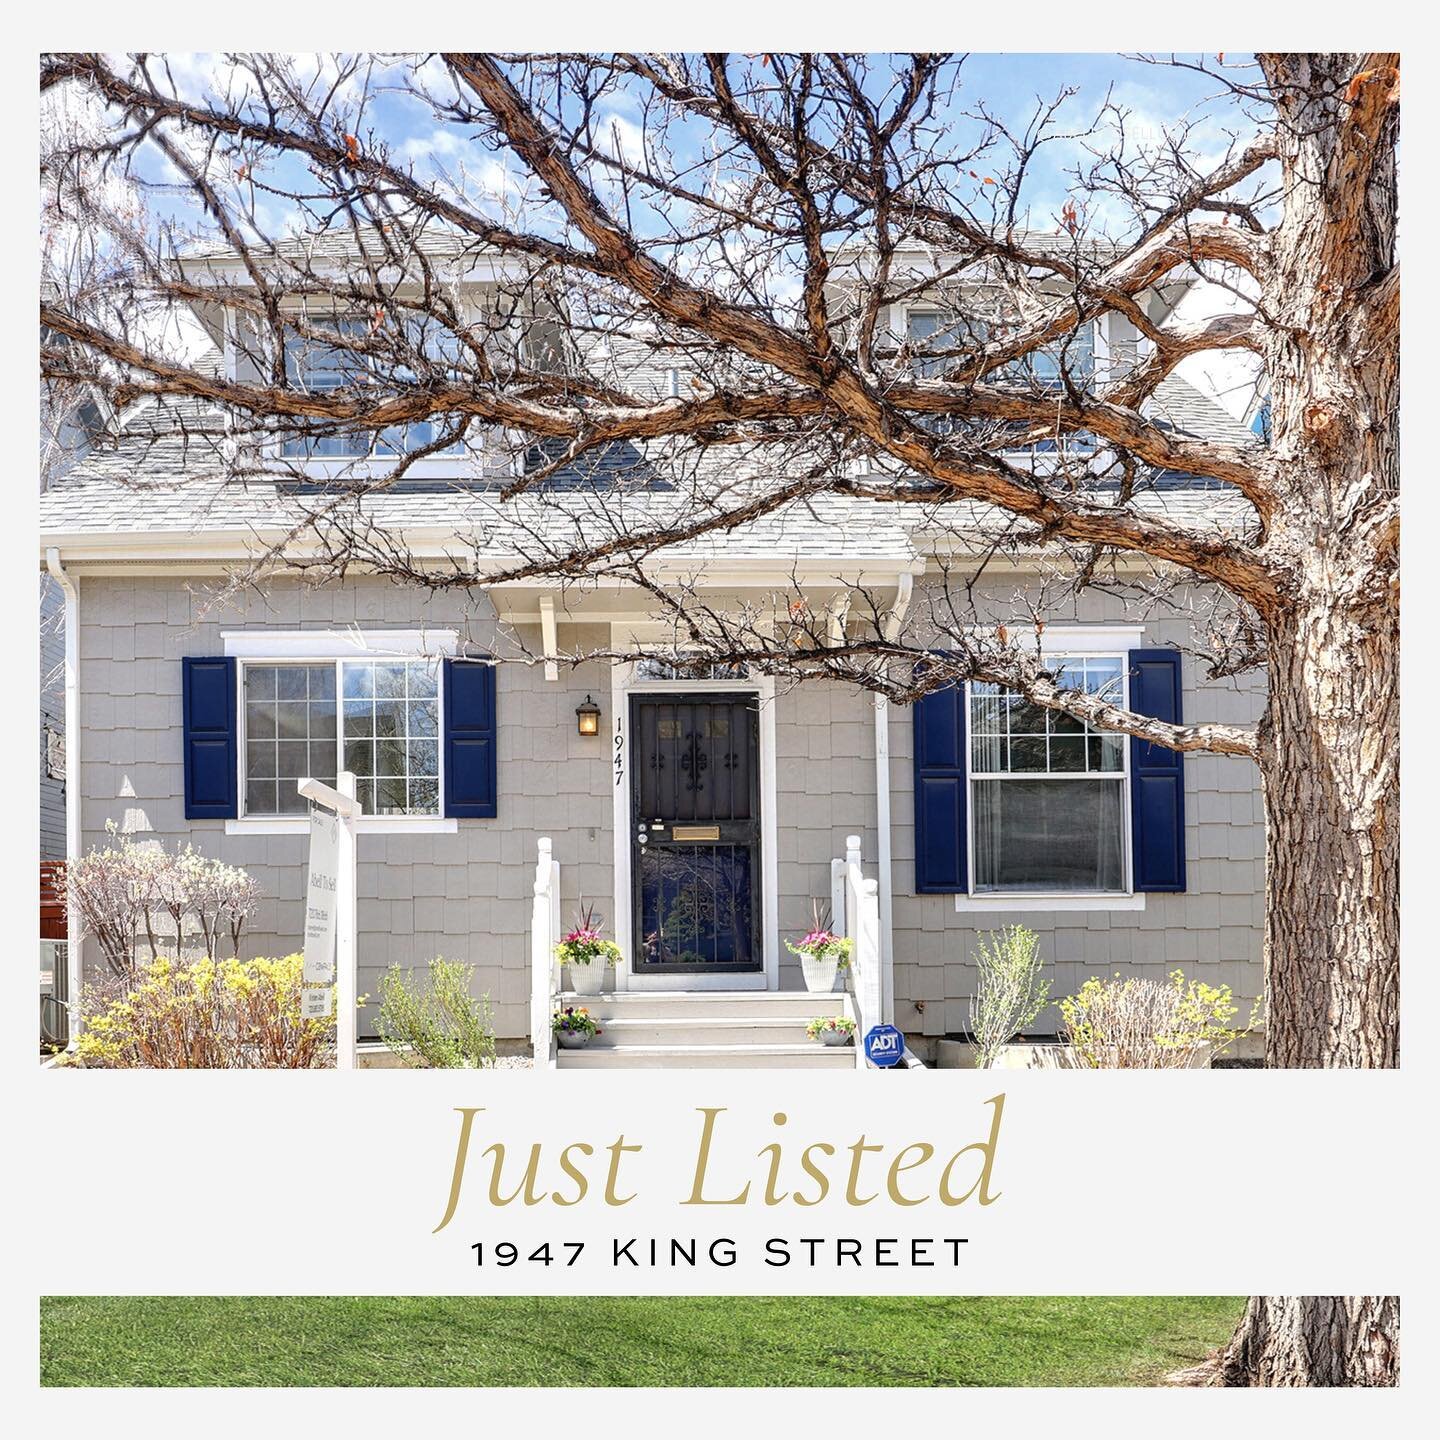 Welcome to your dream home in Sloan's Lake! This fully updated turn-key gem boasts modern conveniences in one of Denver's best neighborhoods. With a fully remodeled modern kitchen, professionally finished hardwood floors, and upgraded lighting throug